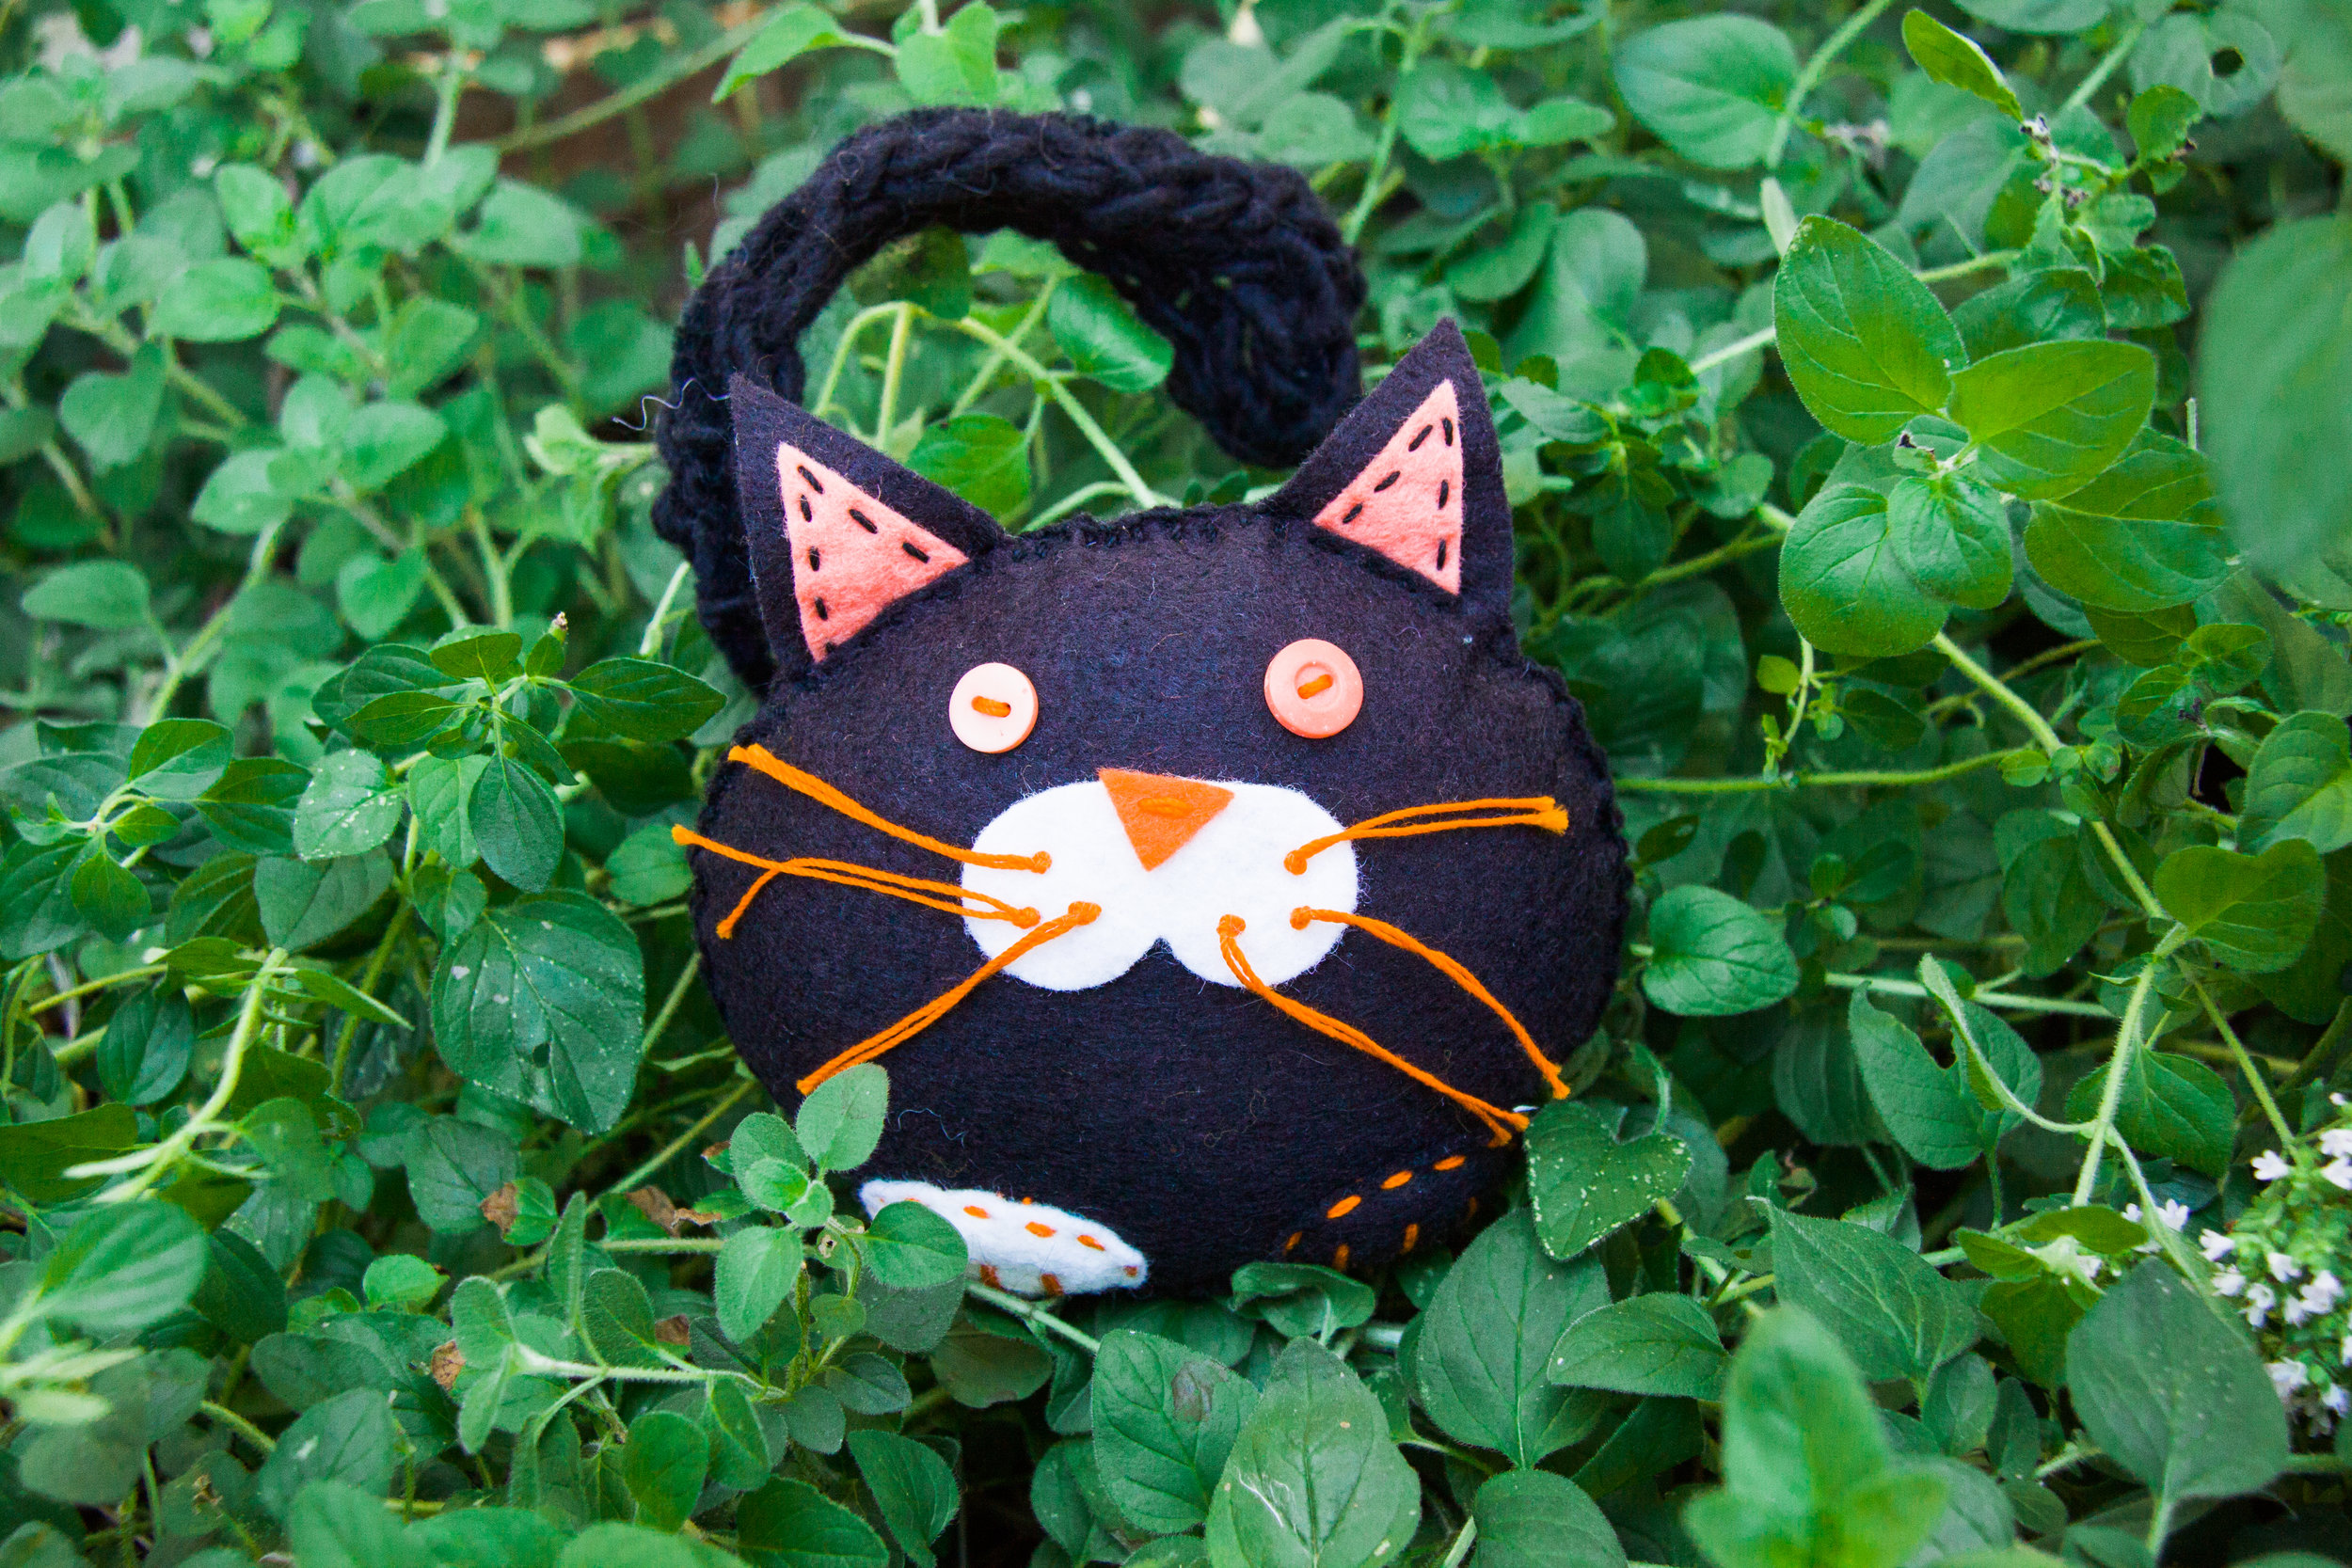 Black cat for Halloween | Autumn crafts the the Forest Fairy Crafts  books by Lenka Vodicka-Paredes and Asia Curry. Handwork and enchanted ideas for children of all ages.